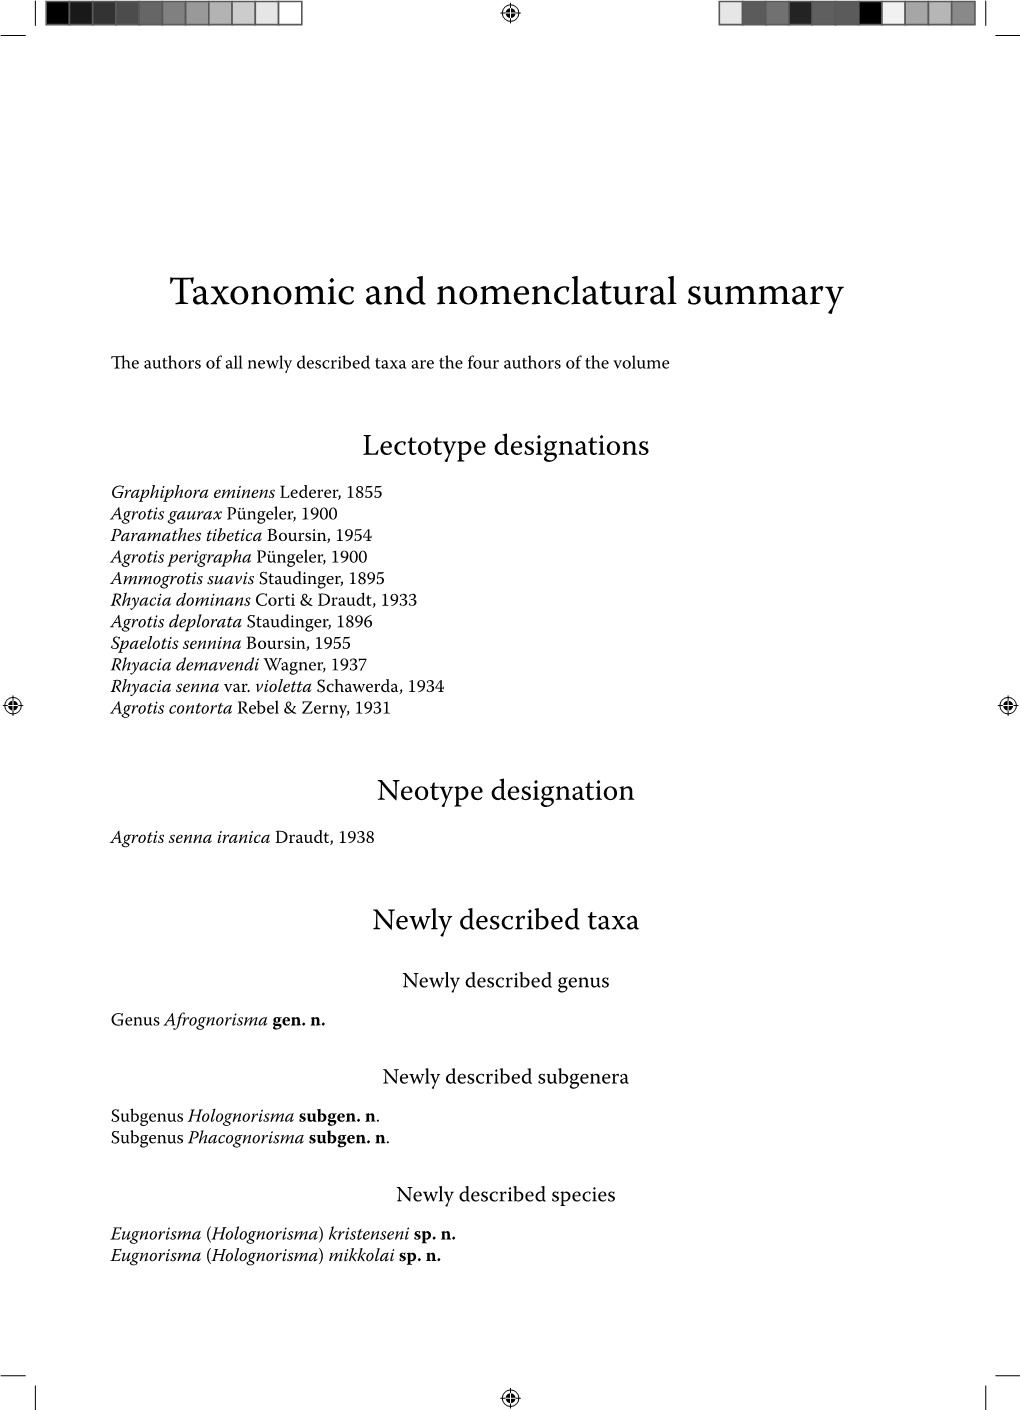 Taxonomic and Nomenclatural Summary